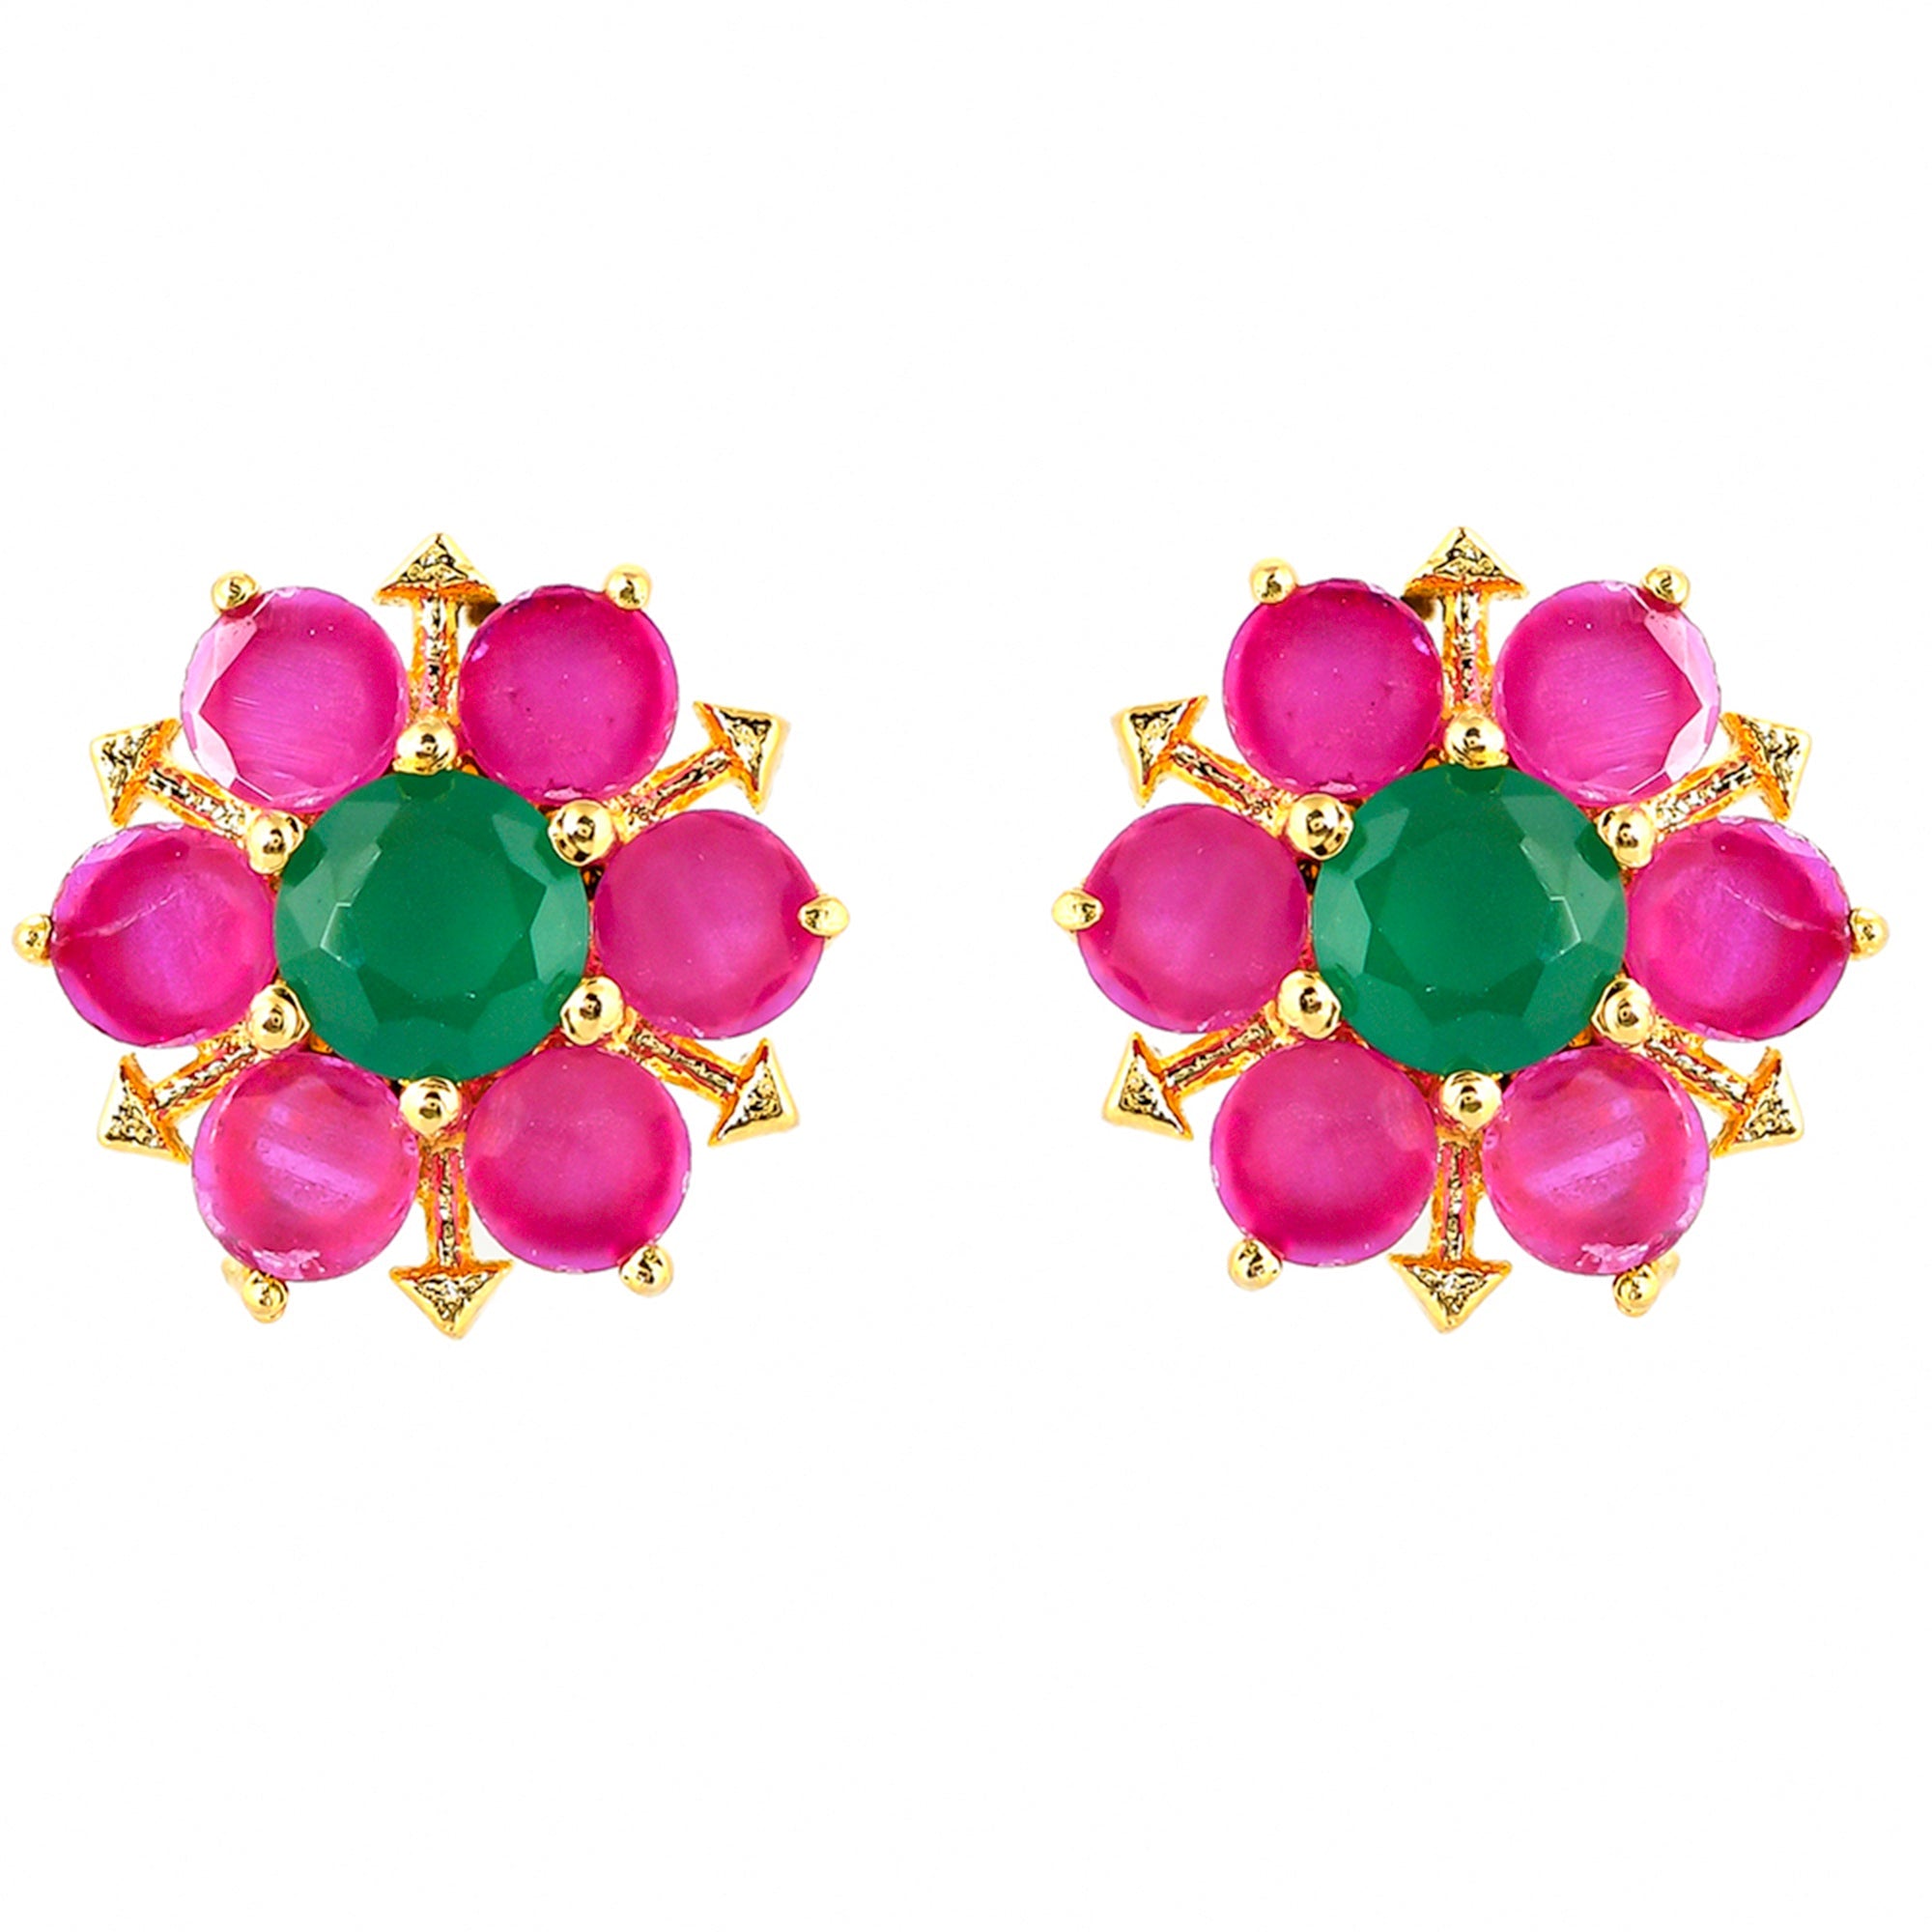 Women's Marquise And Round Cut Pink Cz Gems Stud Earrings - Voylla